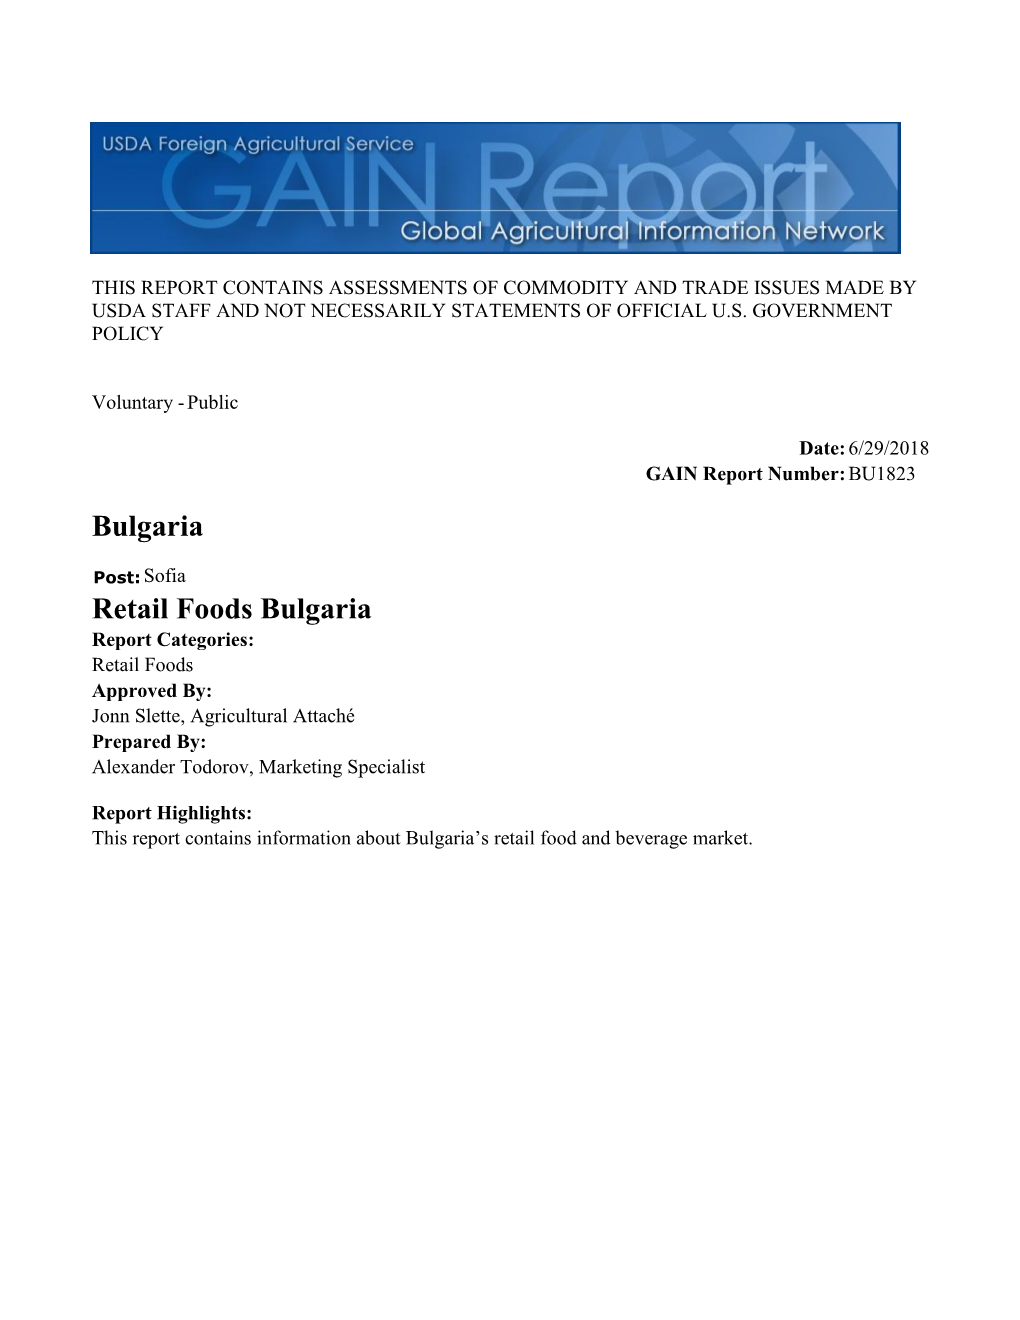 Retail Foods Bulgaria Report Categories: Retail Foods Approved By: Jonn Slette, Agricultural Attaché Prepared By: Alexander Todorov, Marketing Specialist